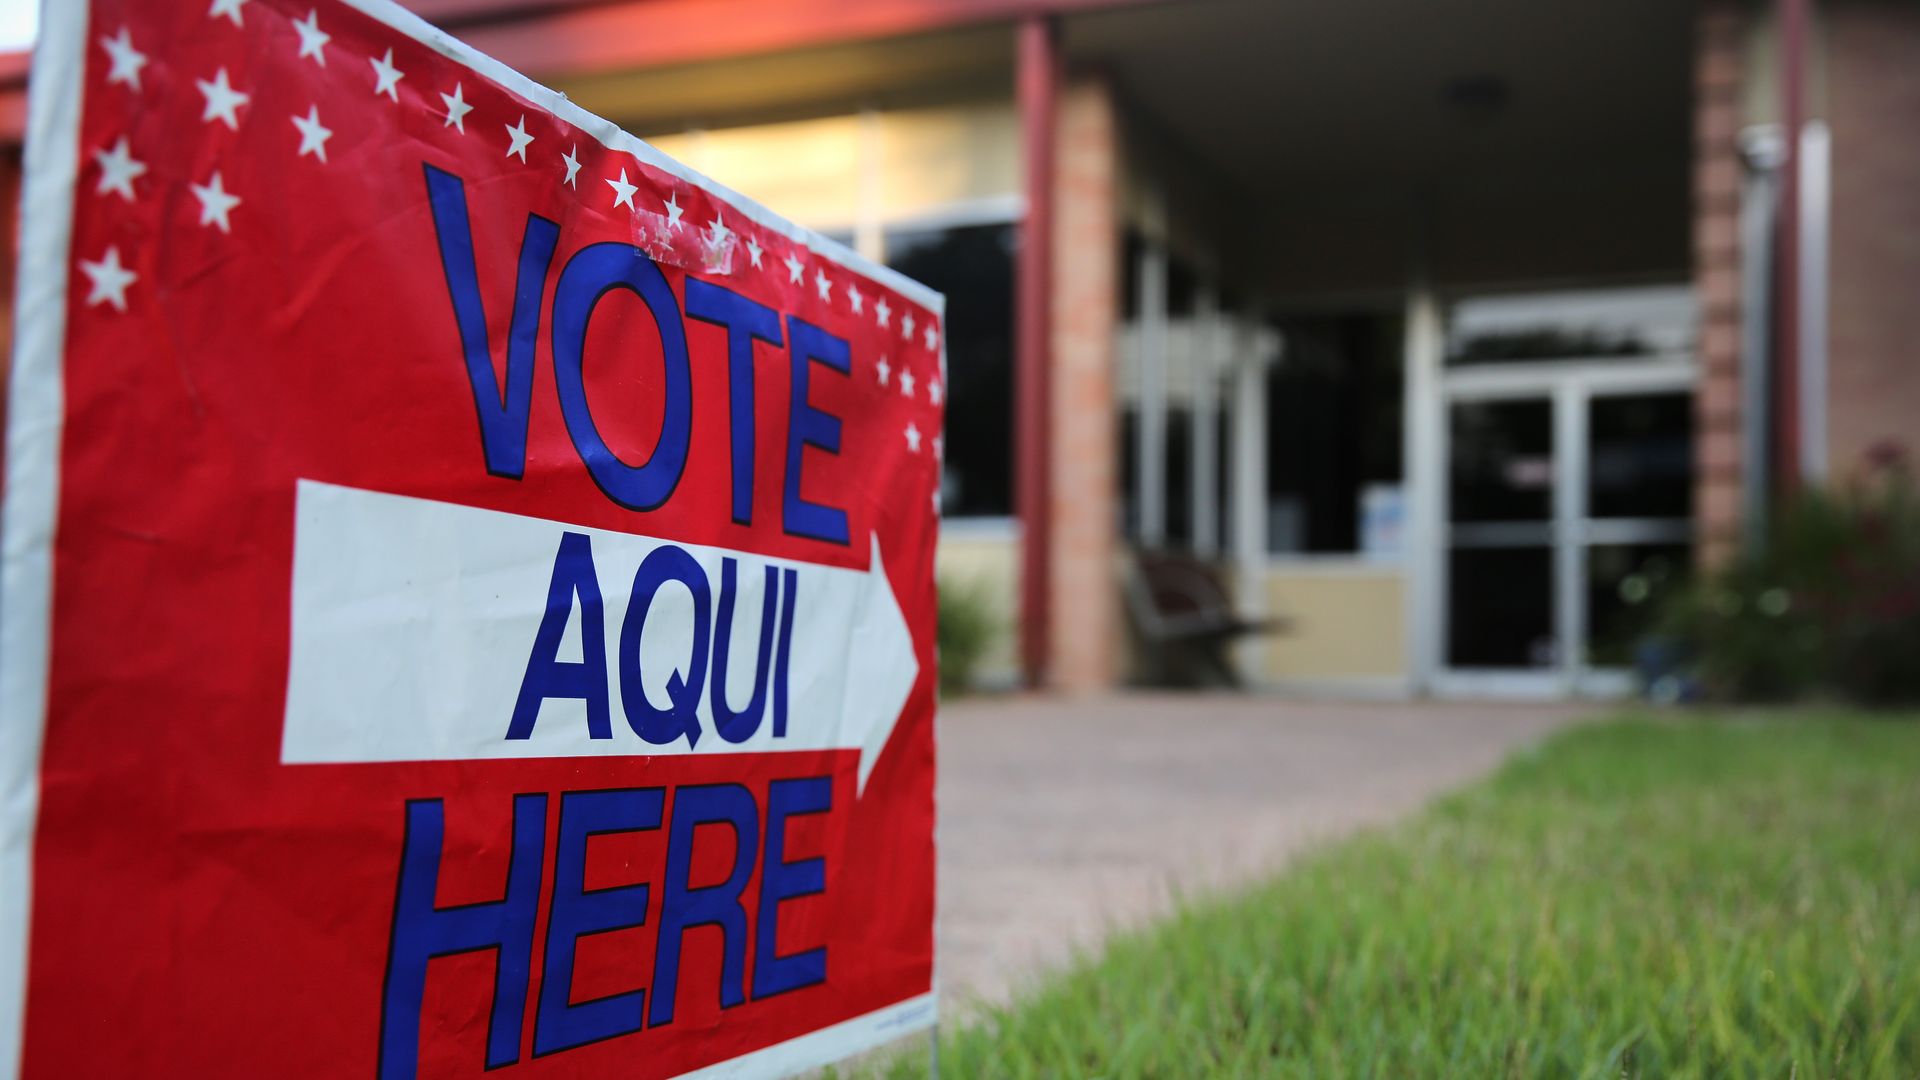 A bilingual sign stands outside a polling center at public library ahead of local elections in Austin, Texas.